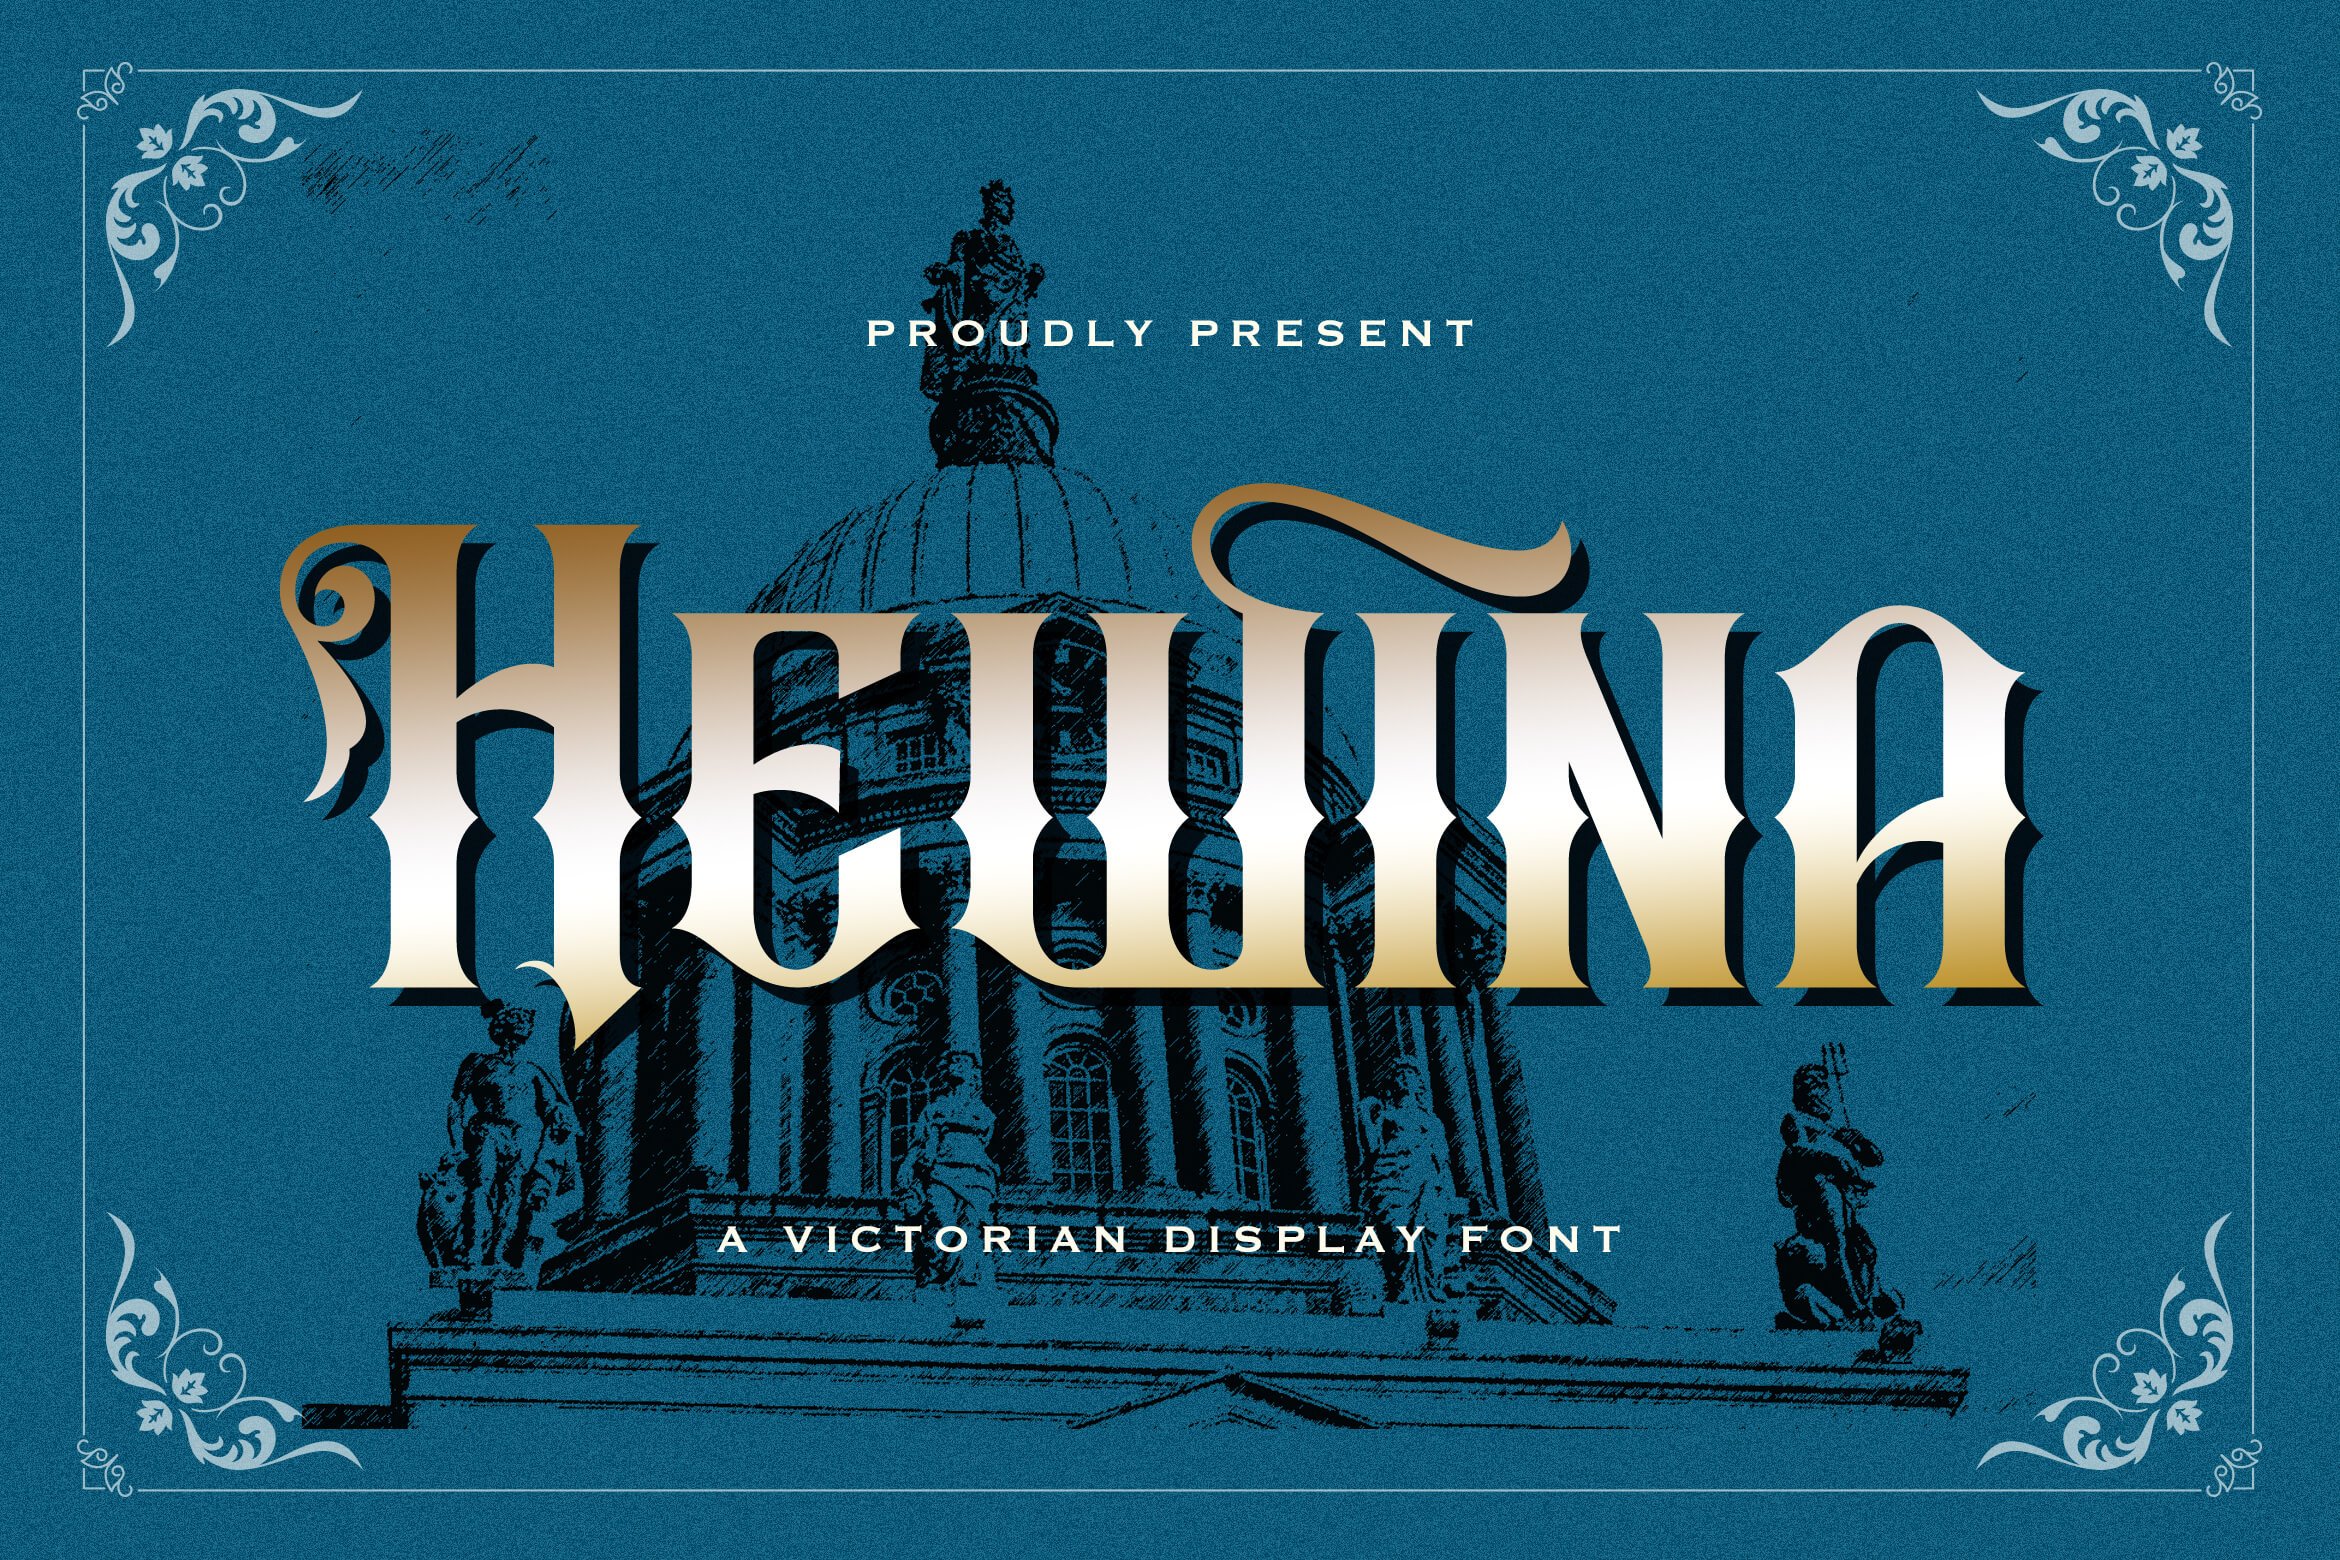 Hewina - Victorian Display Font cover image.